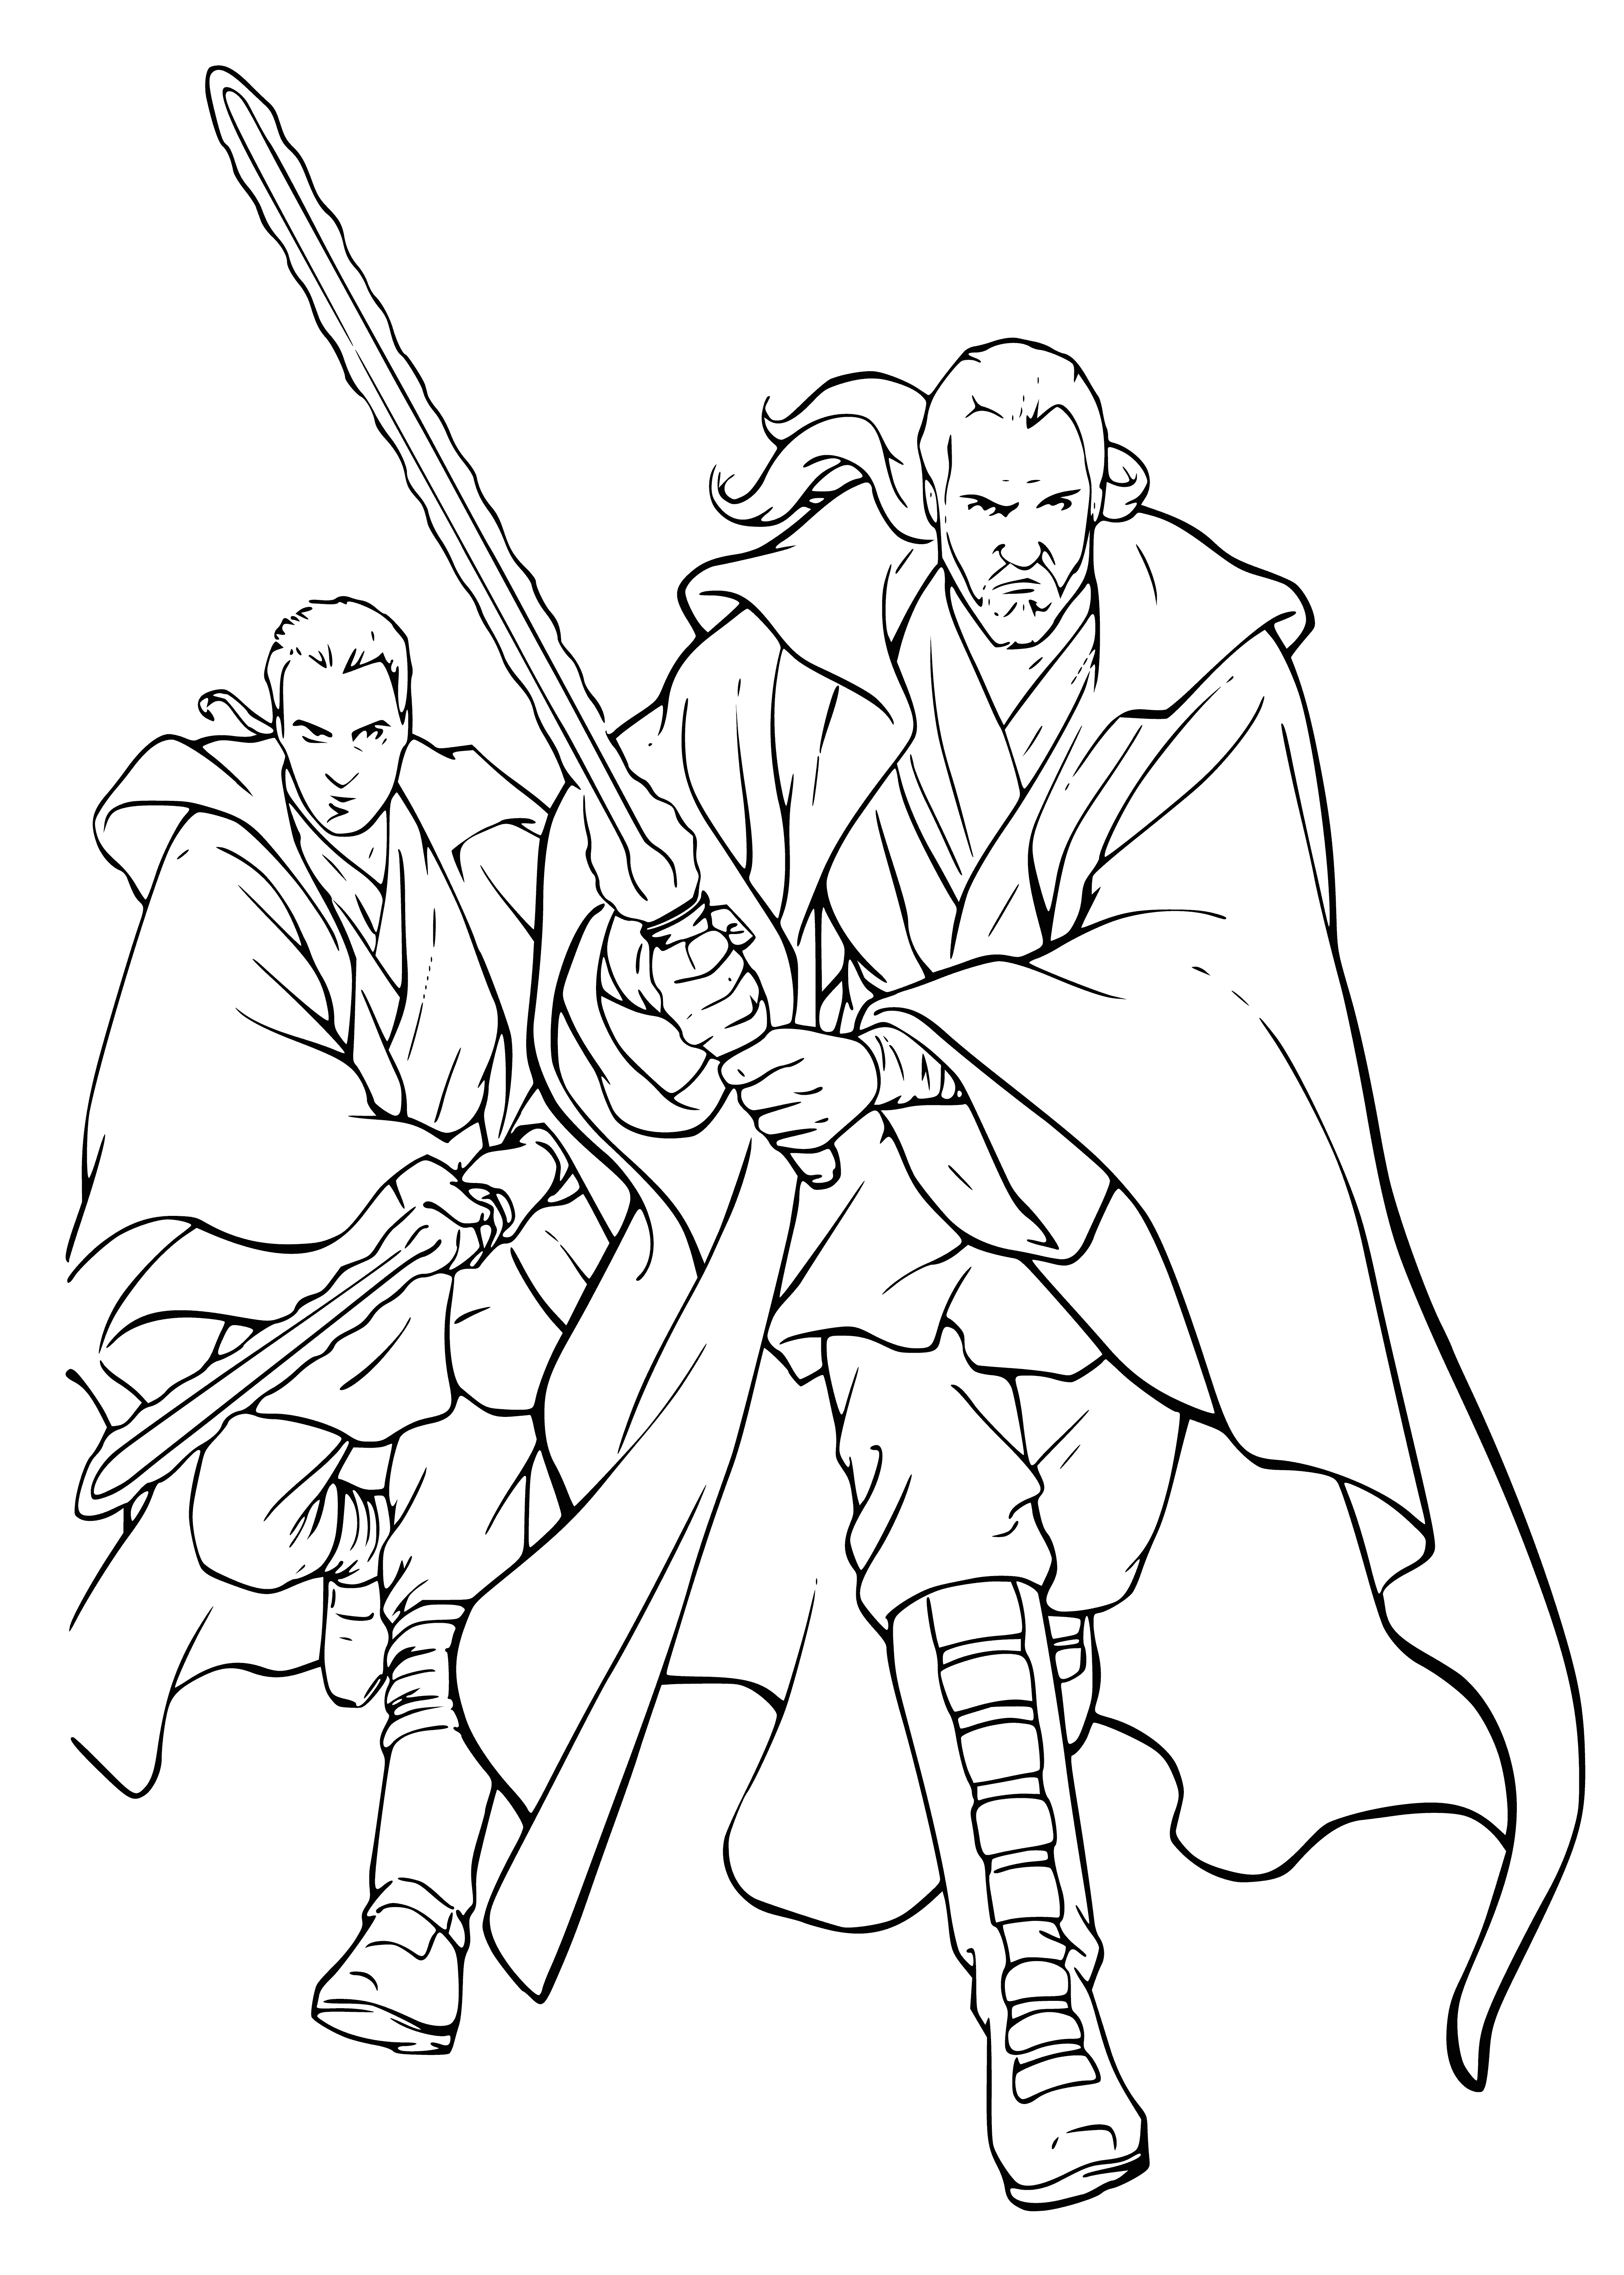 coloring page: Obi-Wan & Qui-Gon battle Darth Maul. Qui-Gon defending with lightsaber while Obi-Wan stands ready to aid. Darth Maul attacks with double-bladed lightsaber.